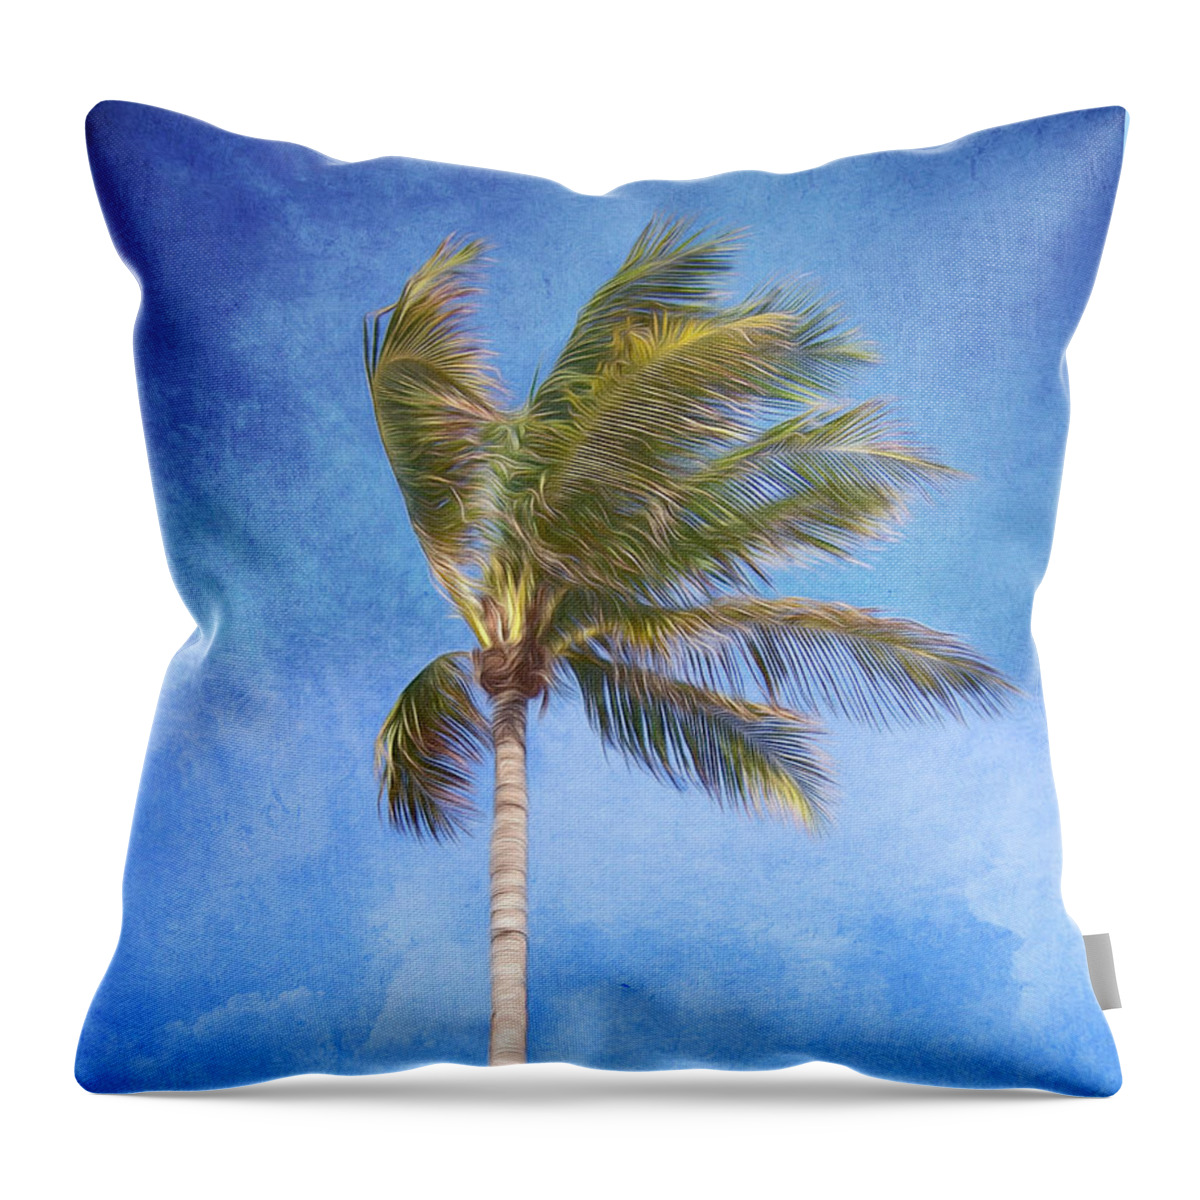 Palm Tree Throw Pillow featuring the digital art Tropical Palm Tree by Phil Perkins